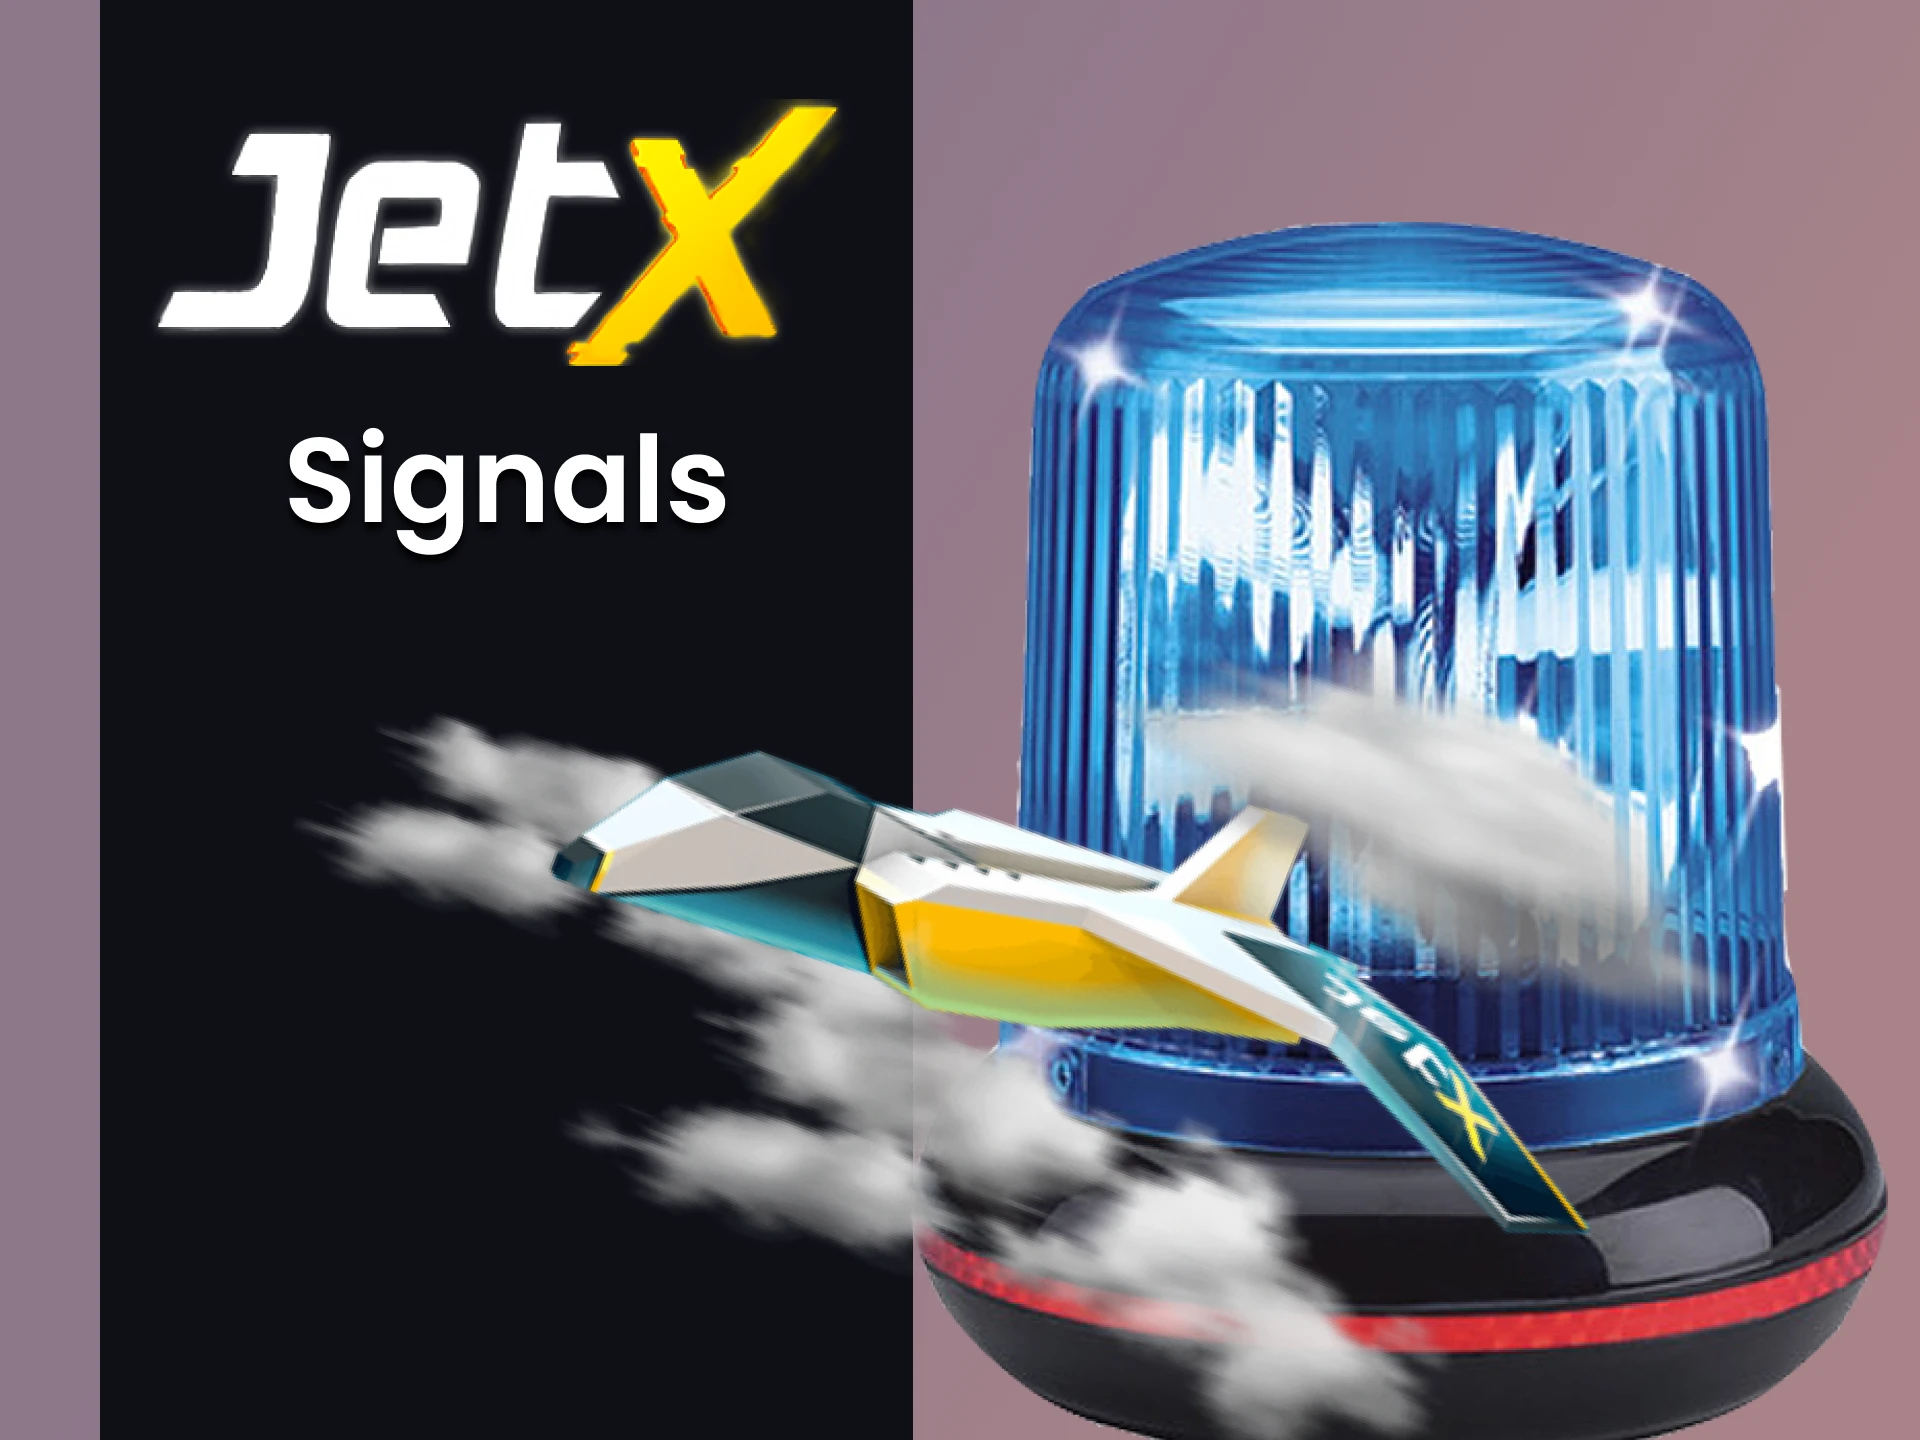 Learn about signals for the JetX game.